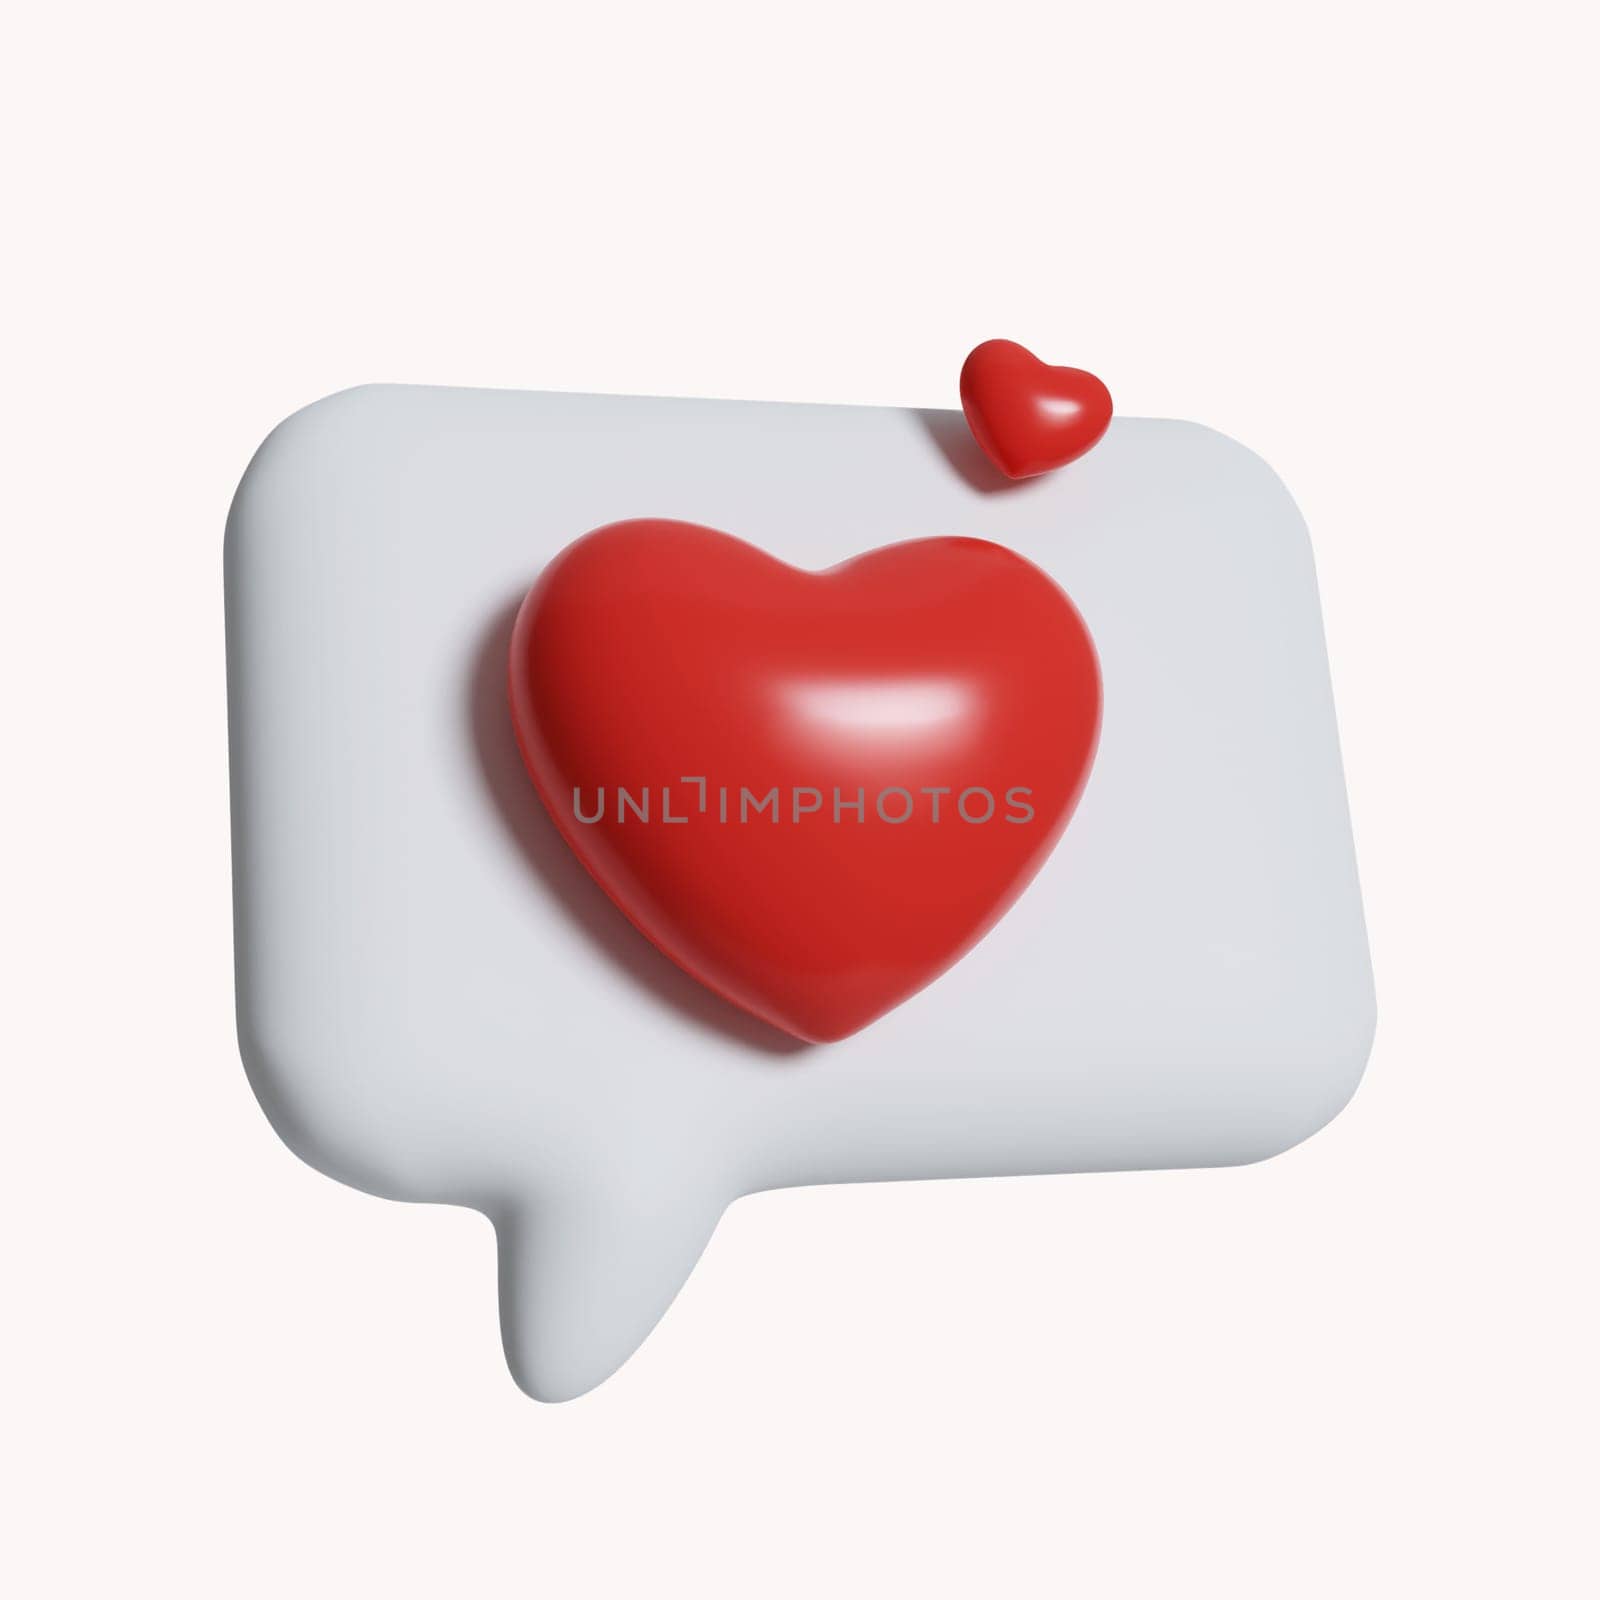 3d Love chat with heart icon. Love chat with heart. icon isolated on white background. 3d rendering illustration. Clipping path. by meepiangraphic